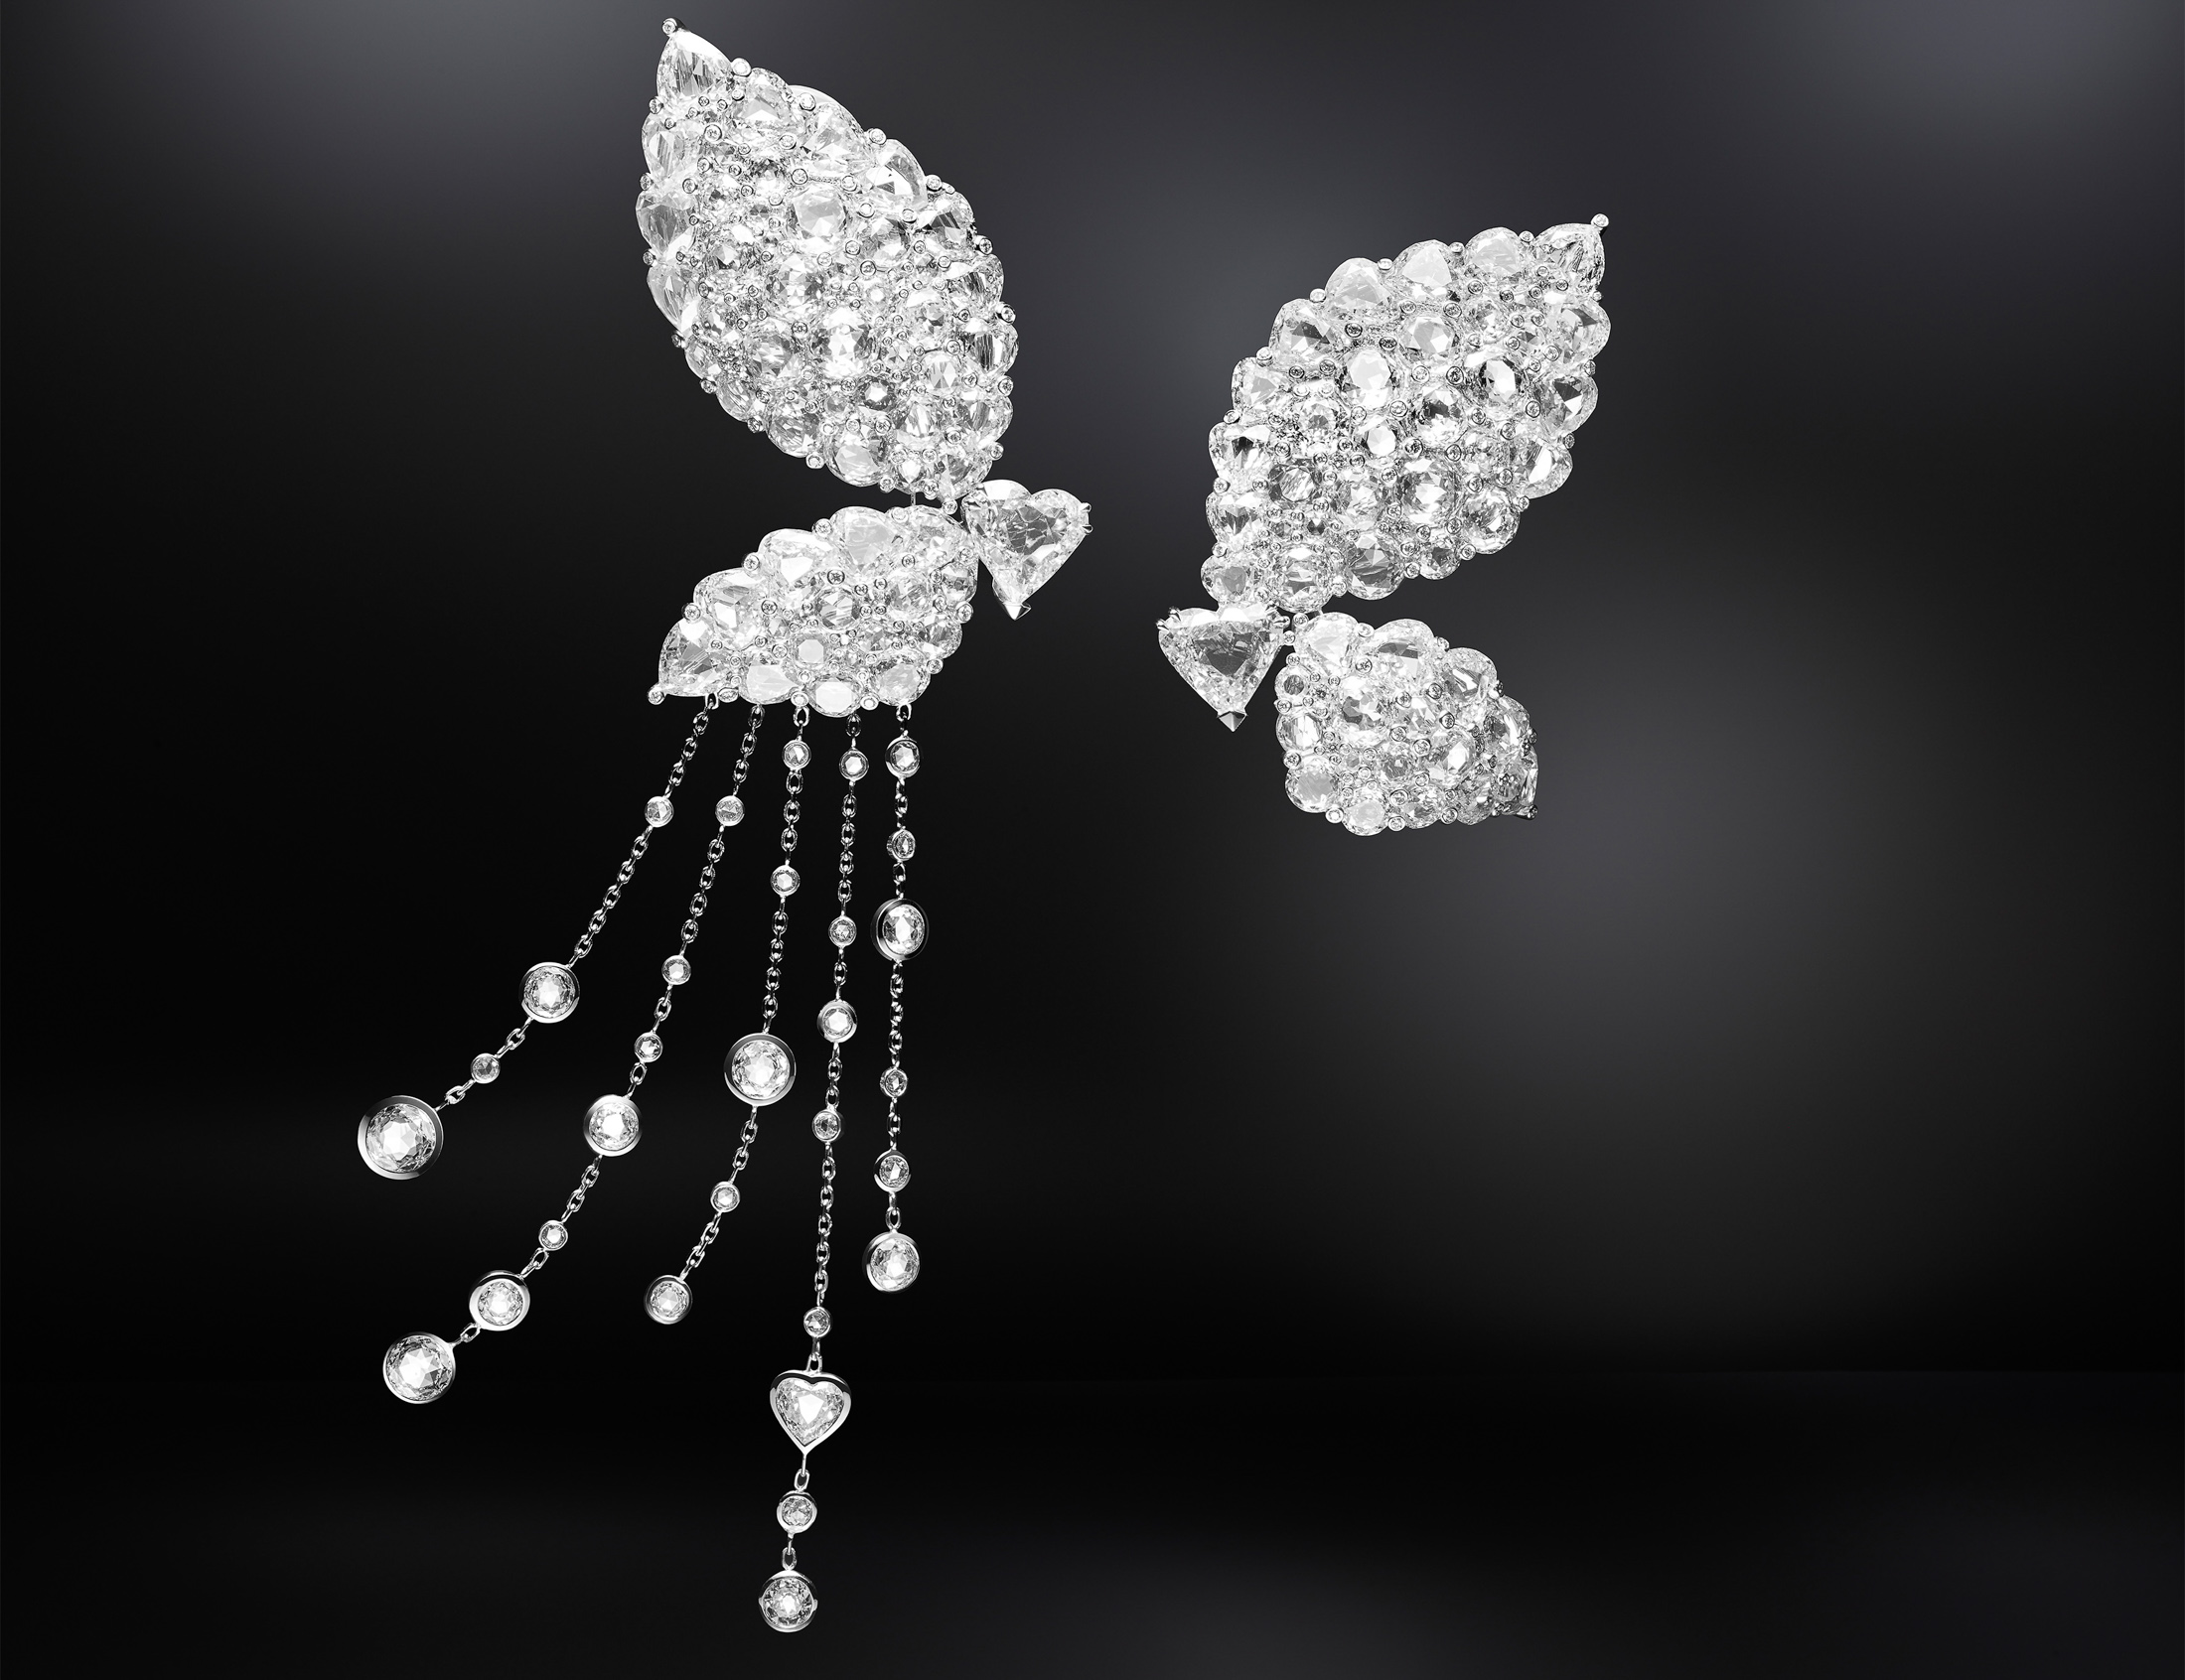 Chopard Debuts Suite of High Jewelry Butterfly Designs with Mariah